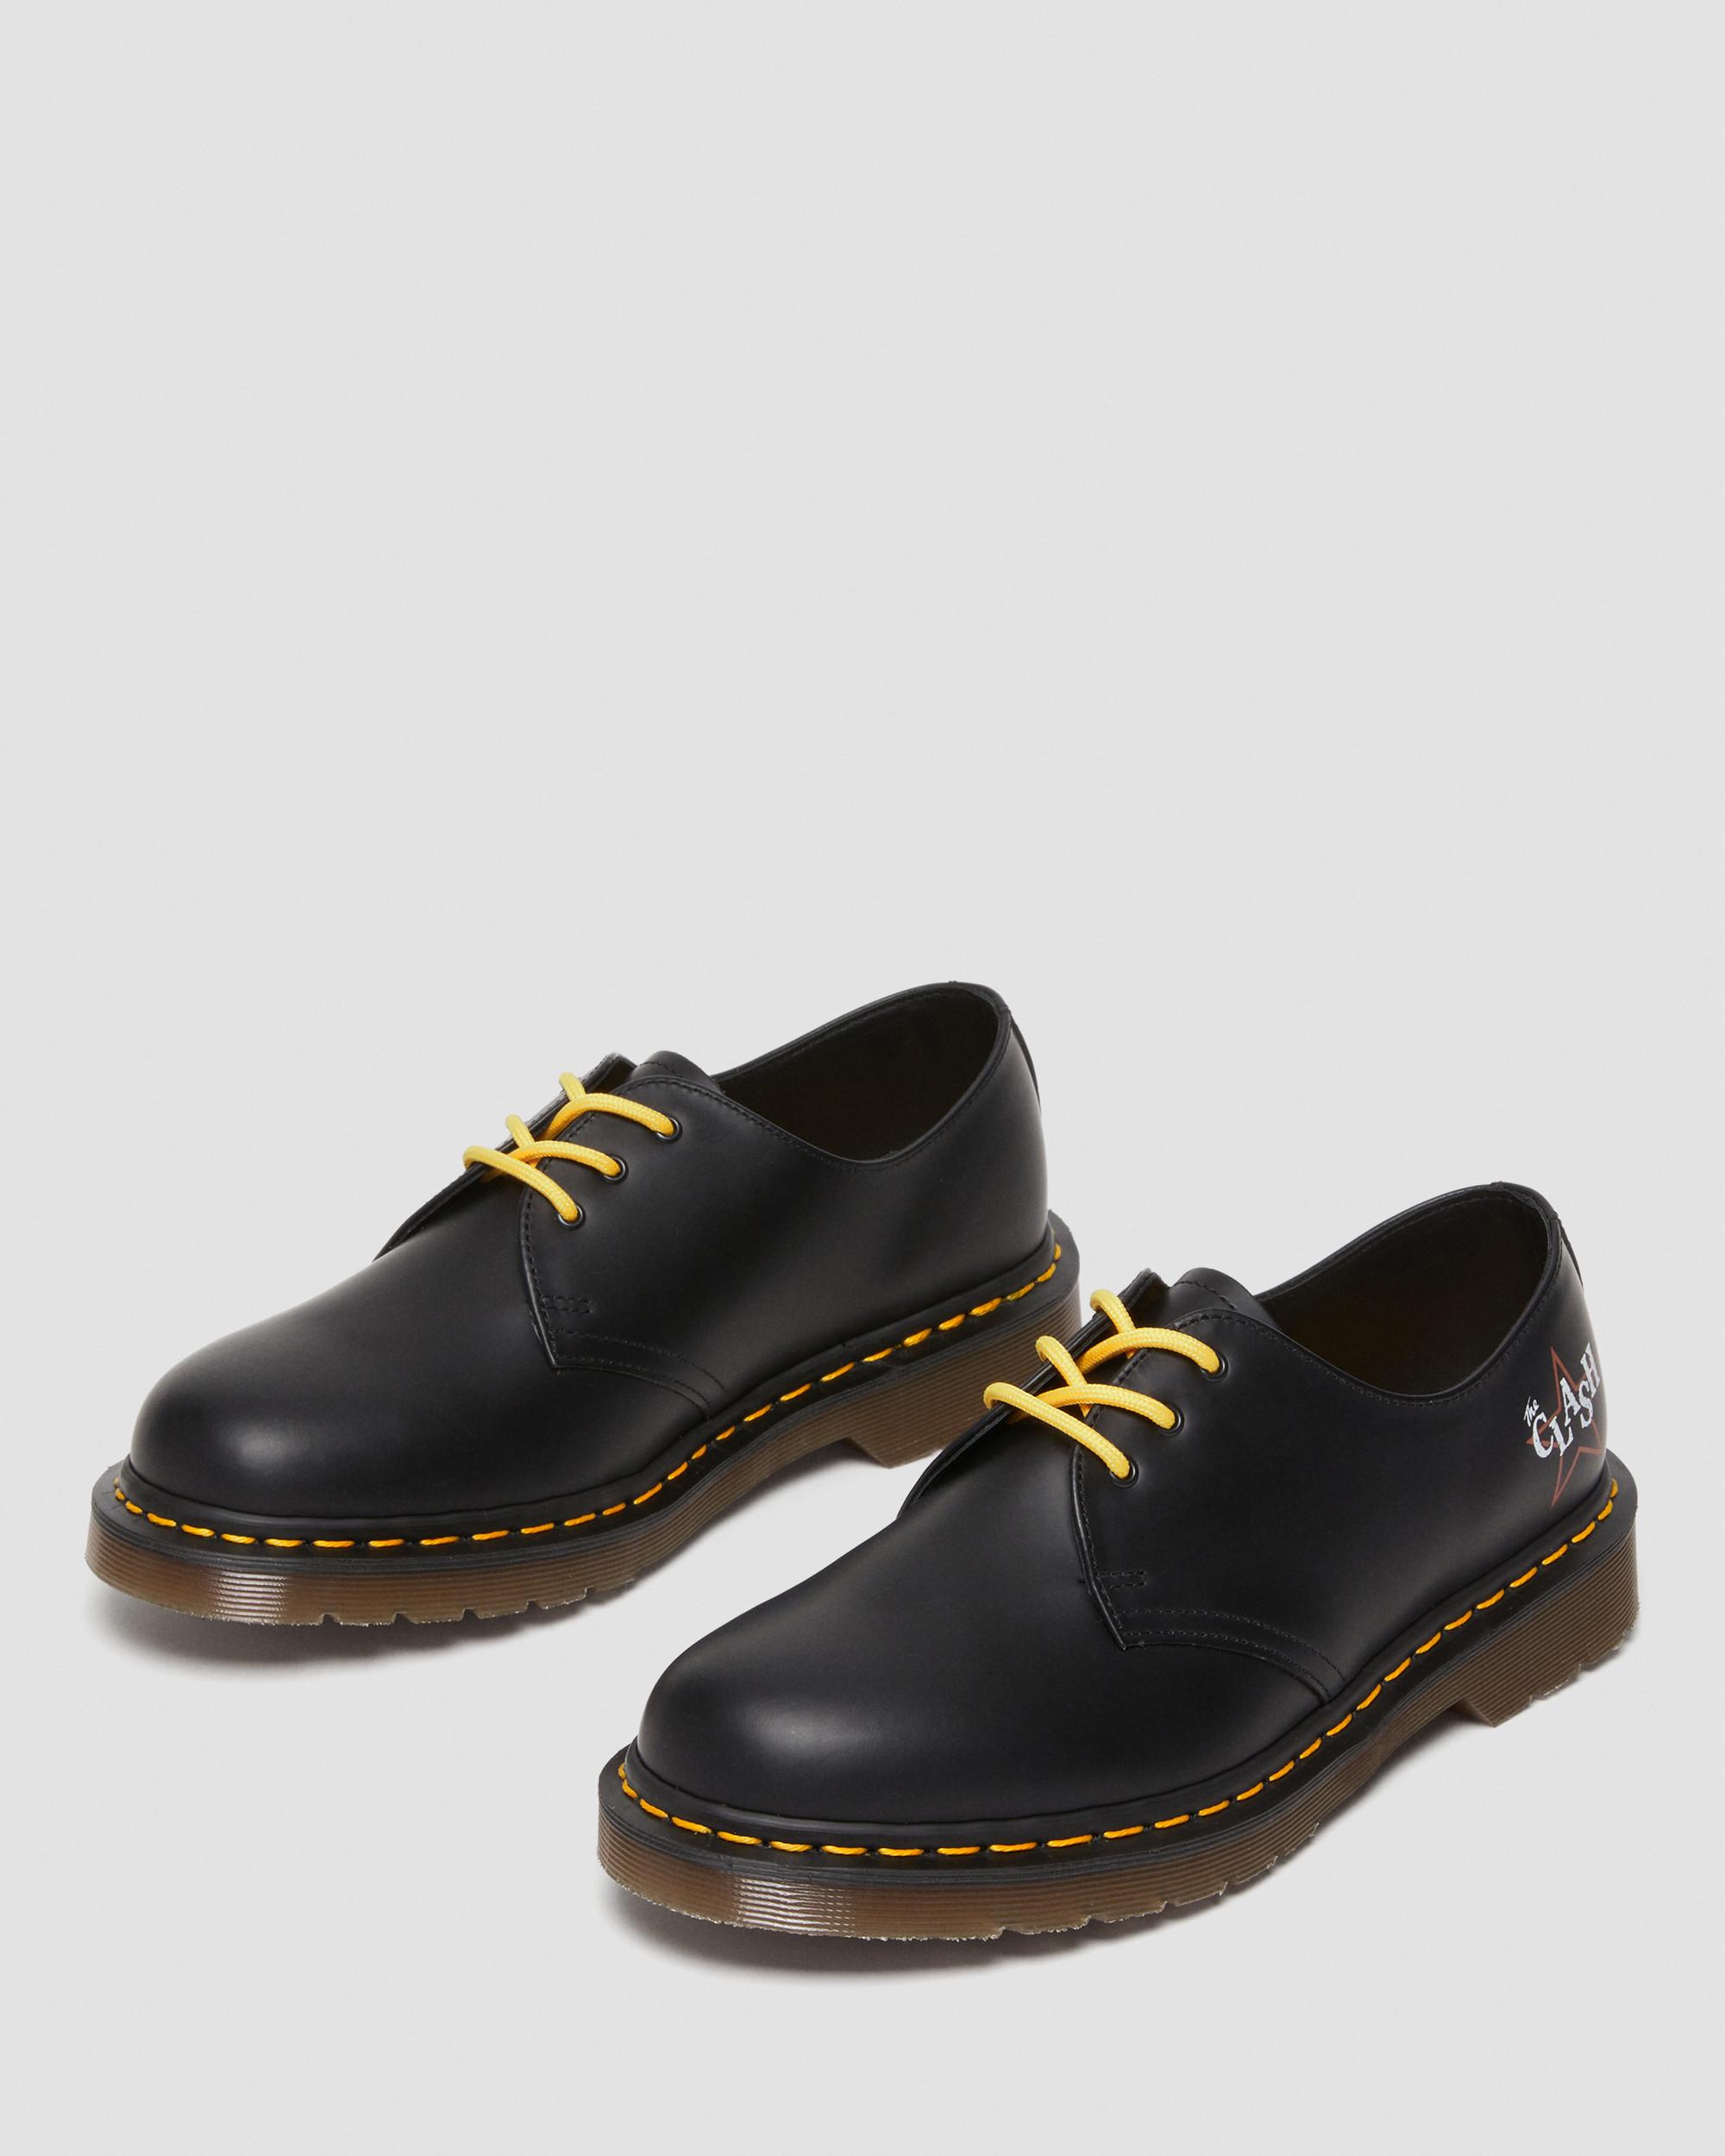 1461 The Clash Made in England Oxford Shoes in Black | Dr. Martens